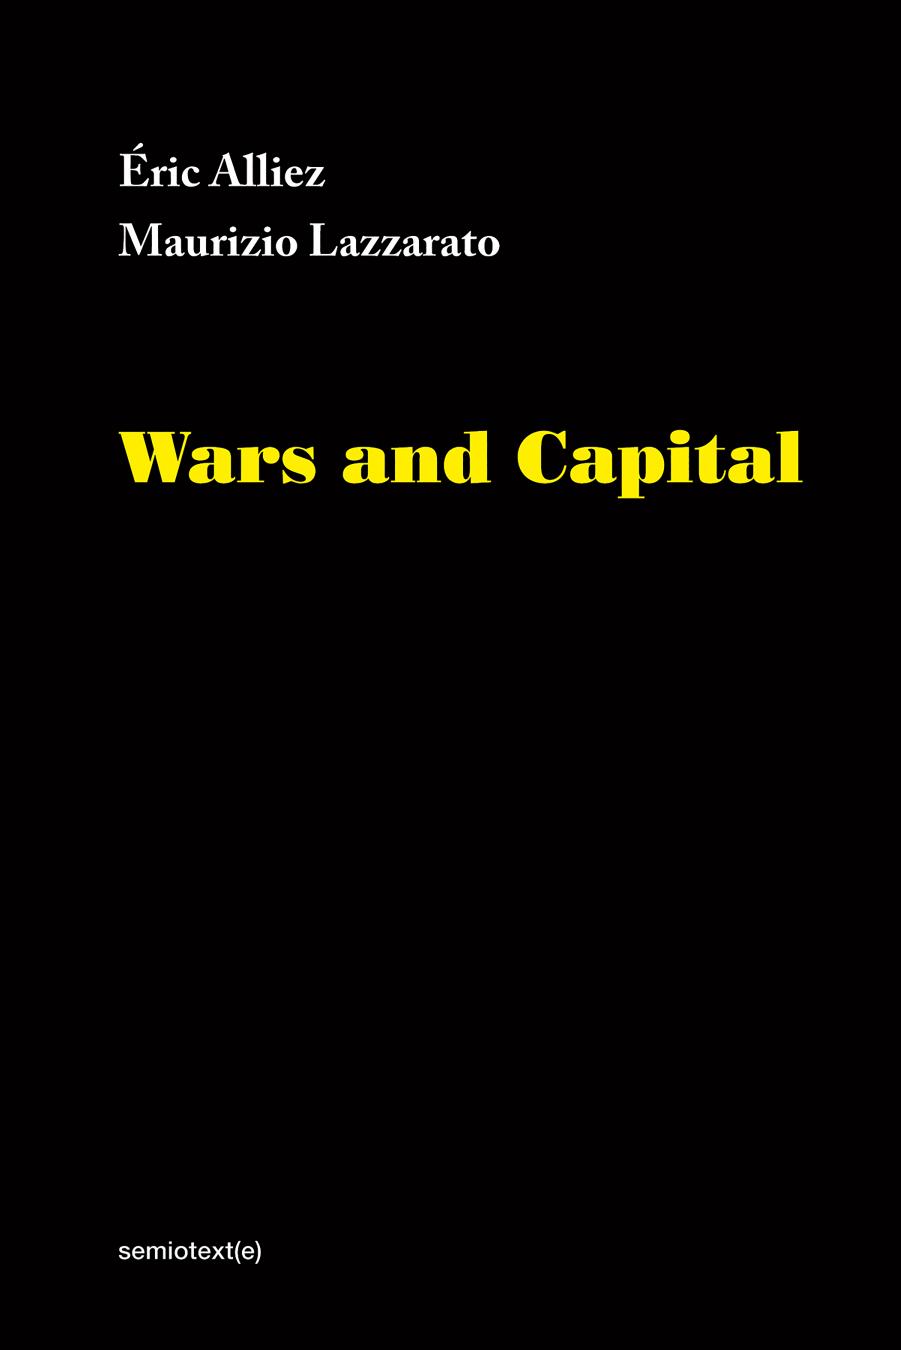 Wars and Capital by Alliez Eric and Maurizio Lazzarato